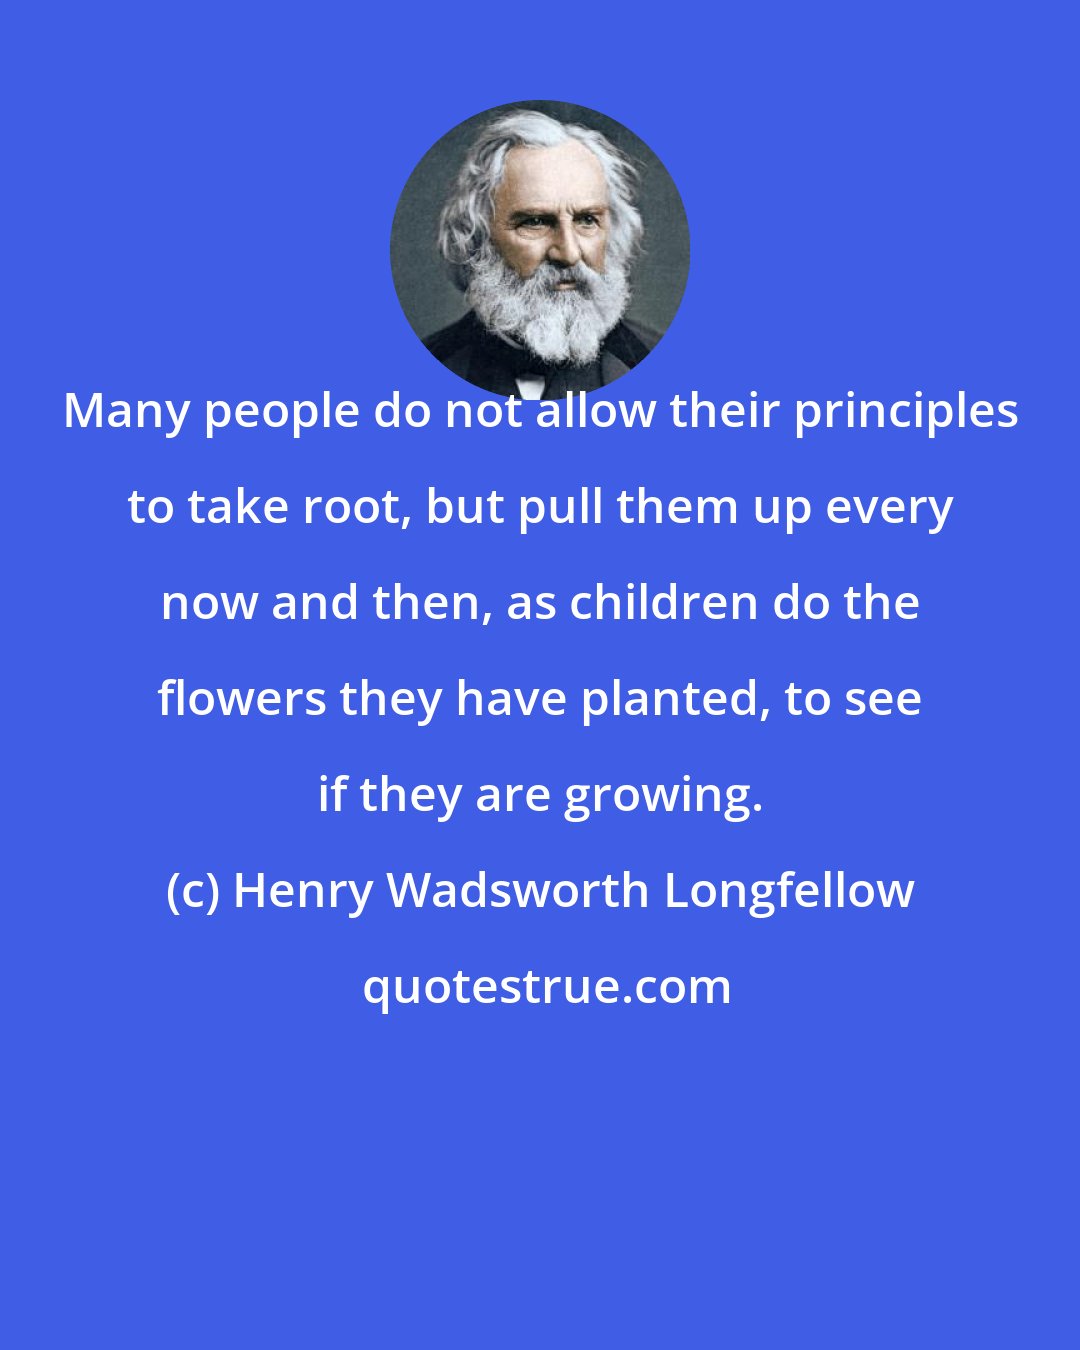 Henry Wadsworth Longfellow: Many people do not allow their principles to take root, but pull them up every now and then, as children do the flowers they have planted, to see if they are growing.